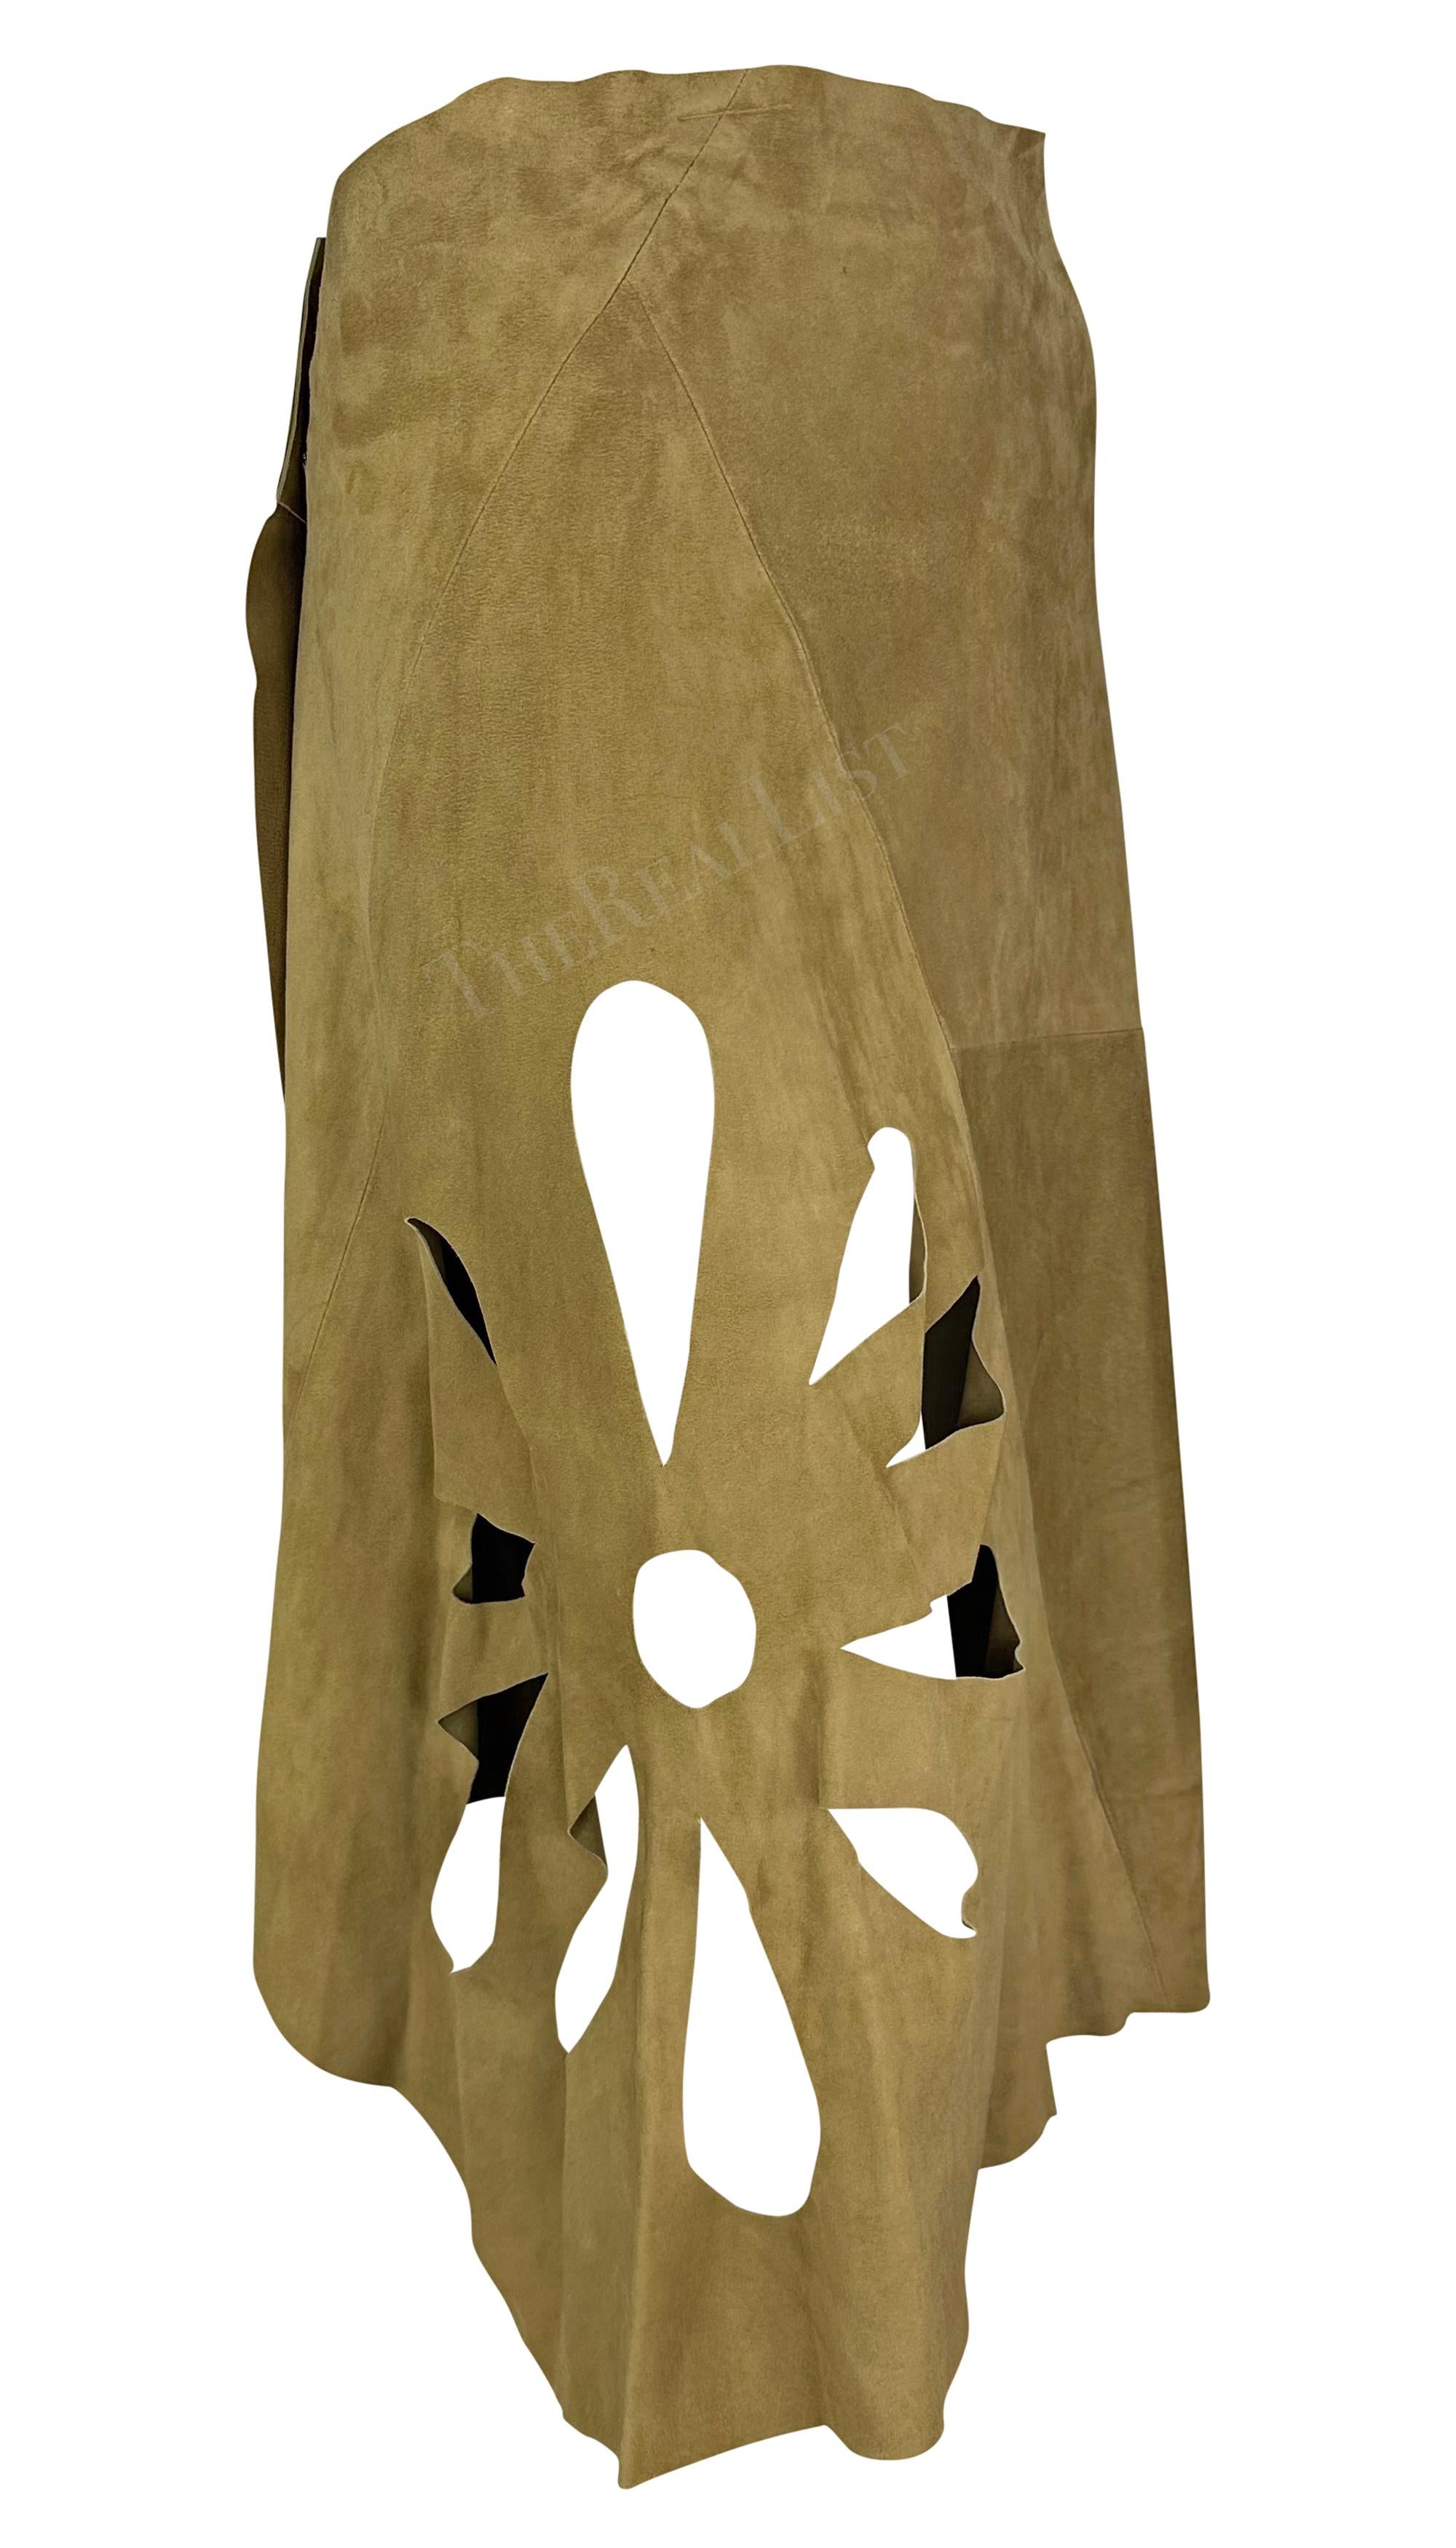 S/S 2002 Gucci by Tom Ford Tan Suede Floral Cutout Flare Wrap Skirt In Excellent Condition For Sale In West Hollywood, CA